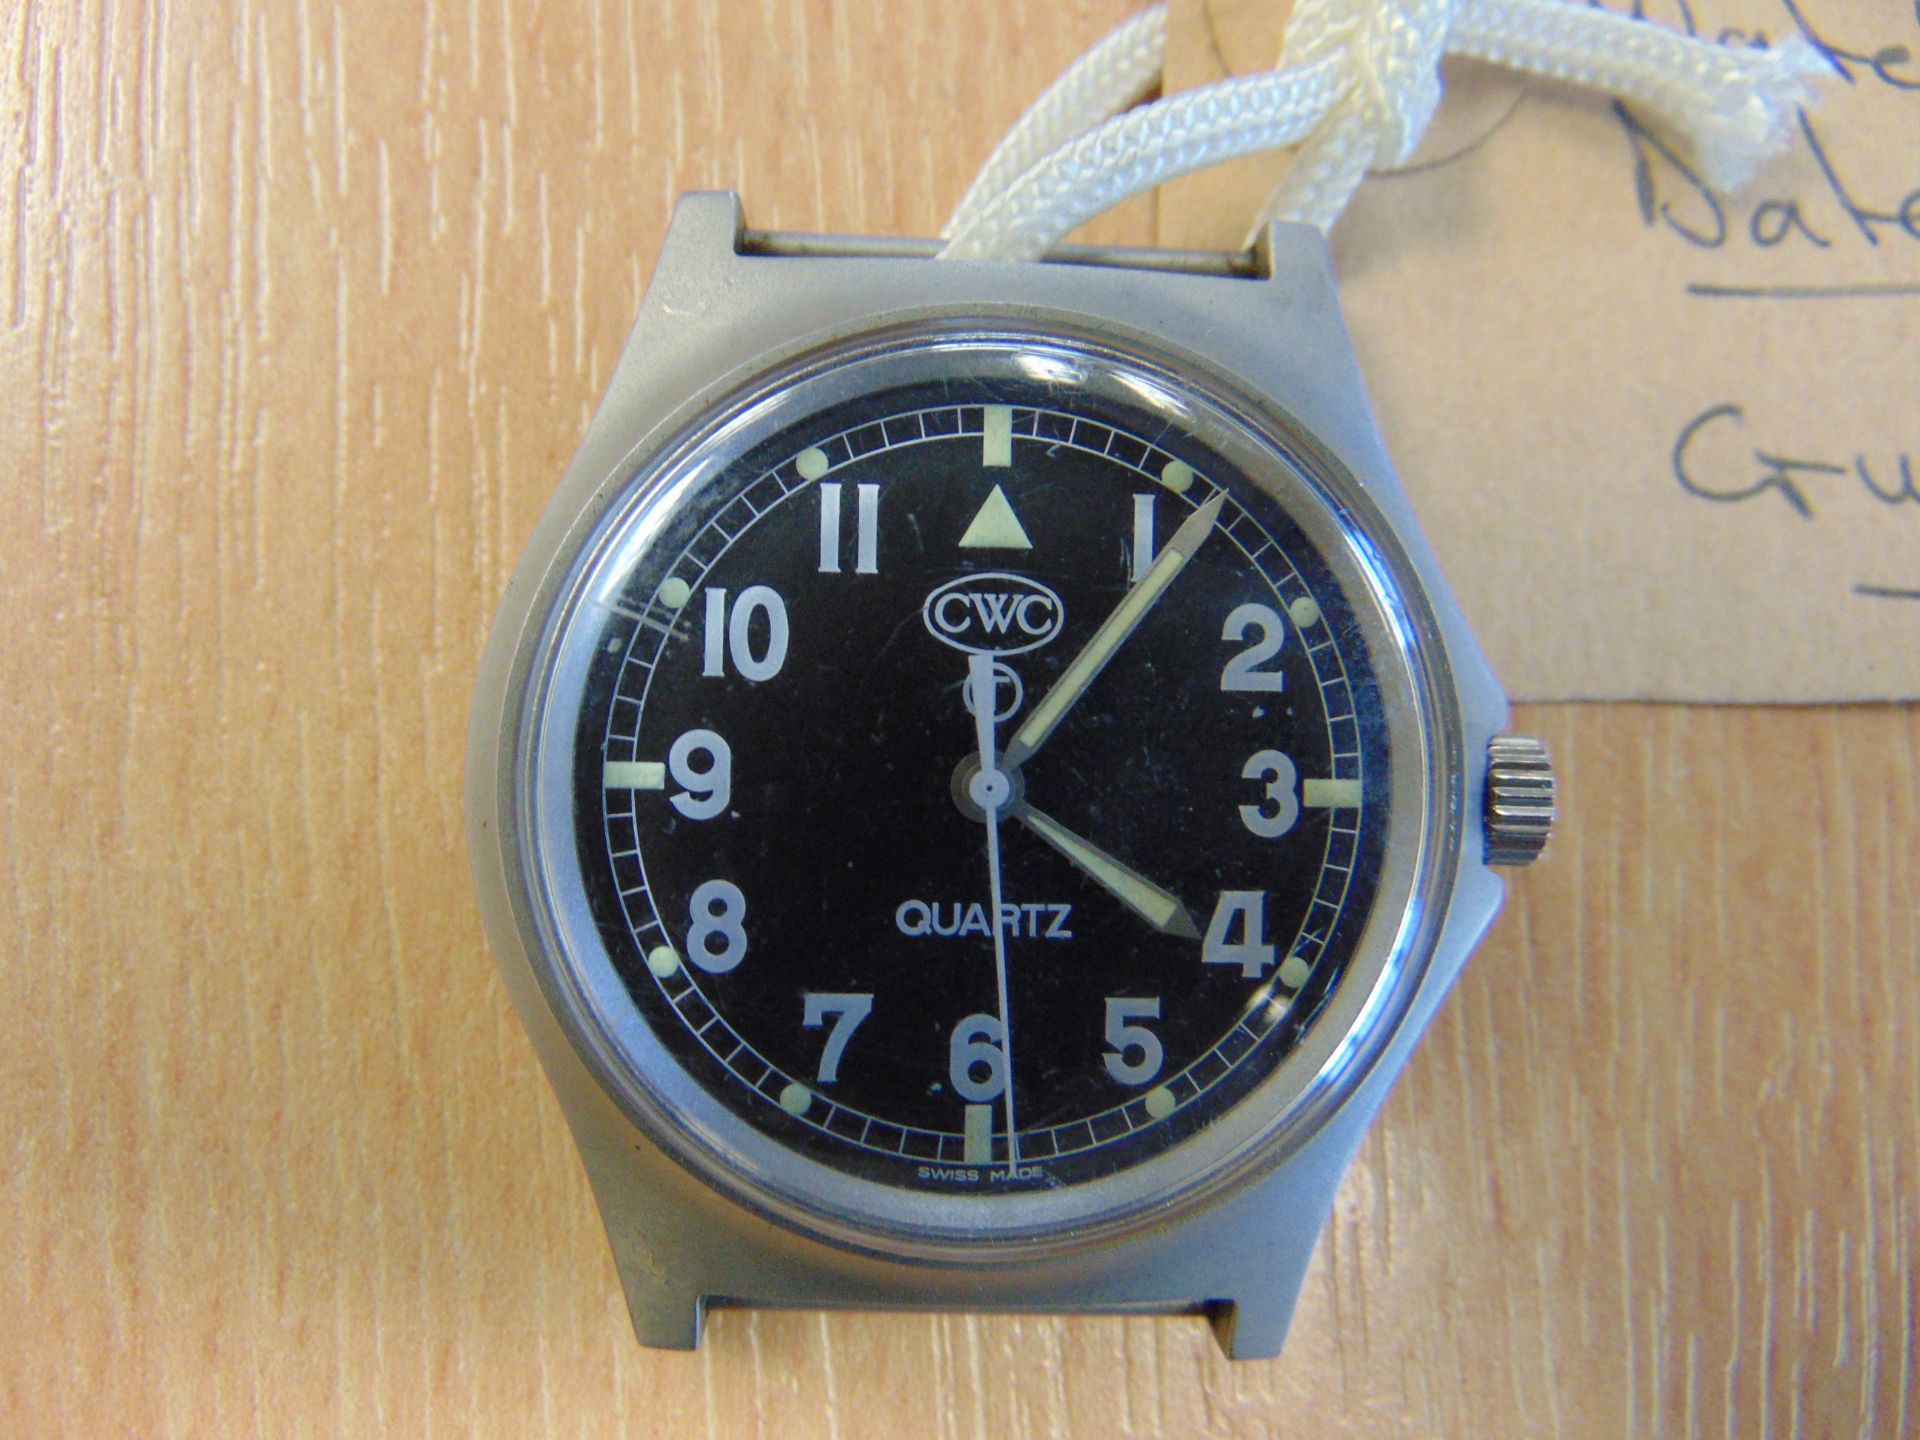 Very Rare CWC (Cabot Watch Co Switzerland) 0552 Royal Marines Service Watch, Nato Marks, Date 1990